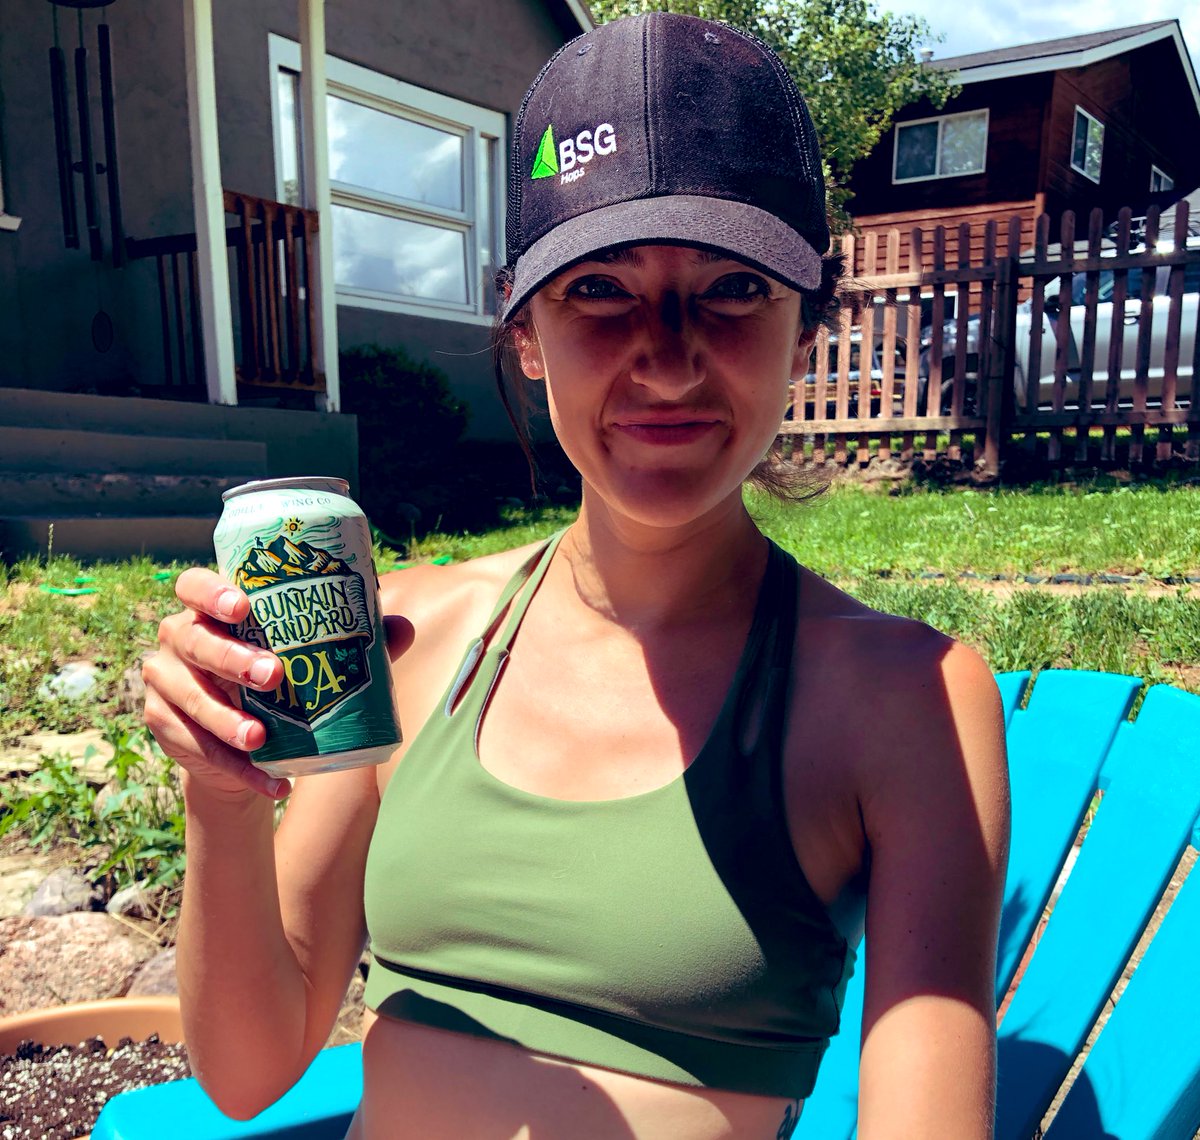 This @BSGCraftBrewing has become my new standard for mountain living. Thanks for the #MountainStandard, @OdellBrewing! Full on summer mode over here. #hifromdurango #cheerstothat